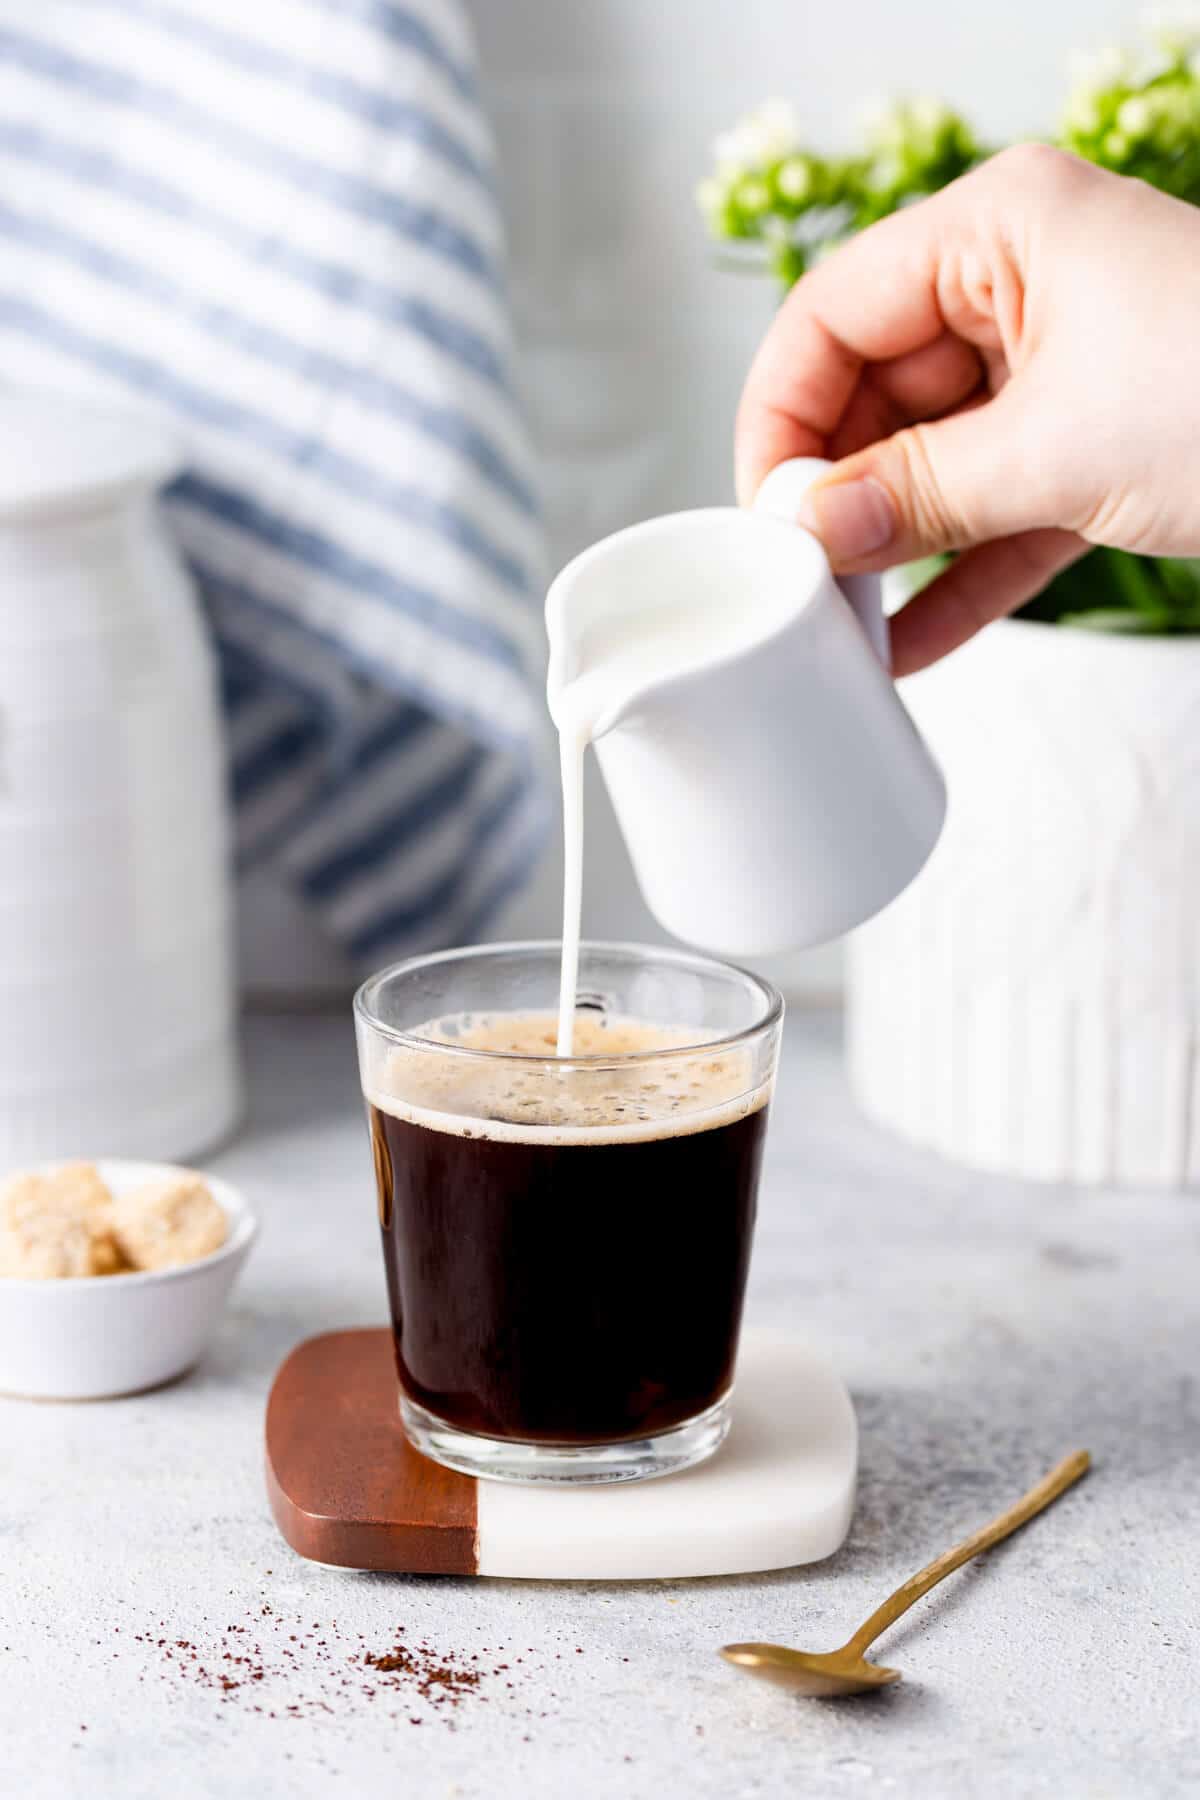 milk being poured into a cup of coffee